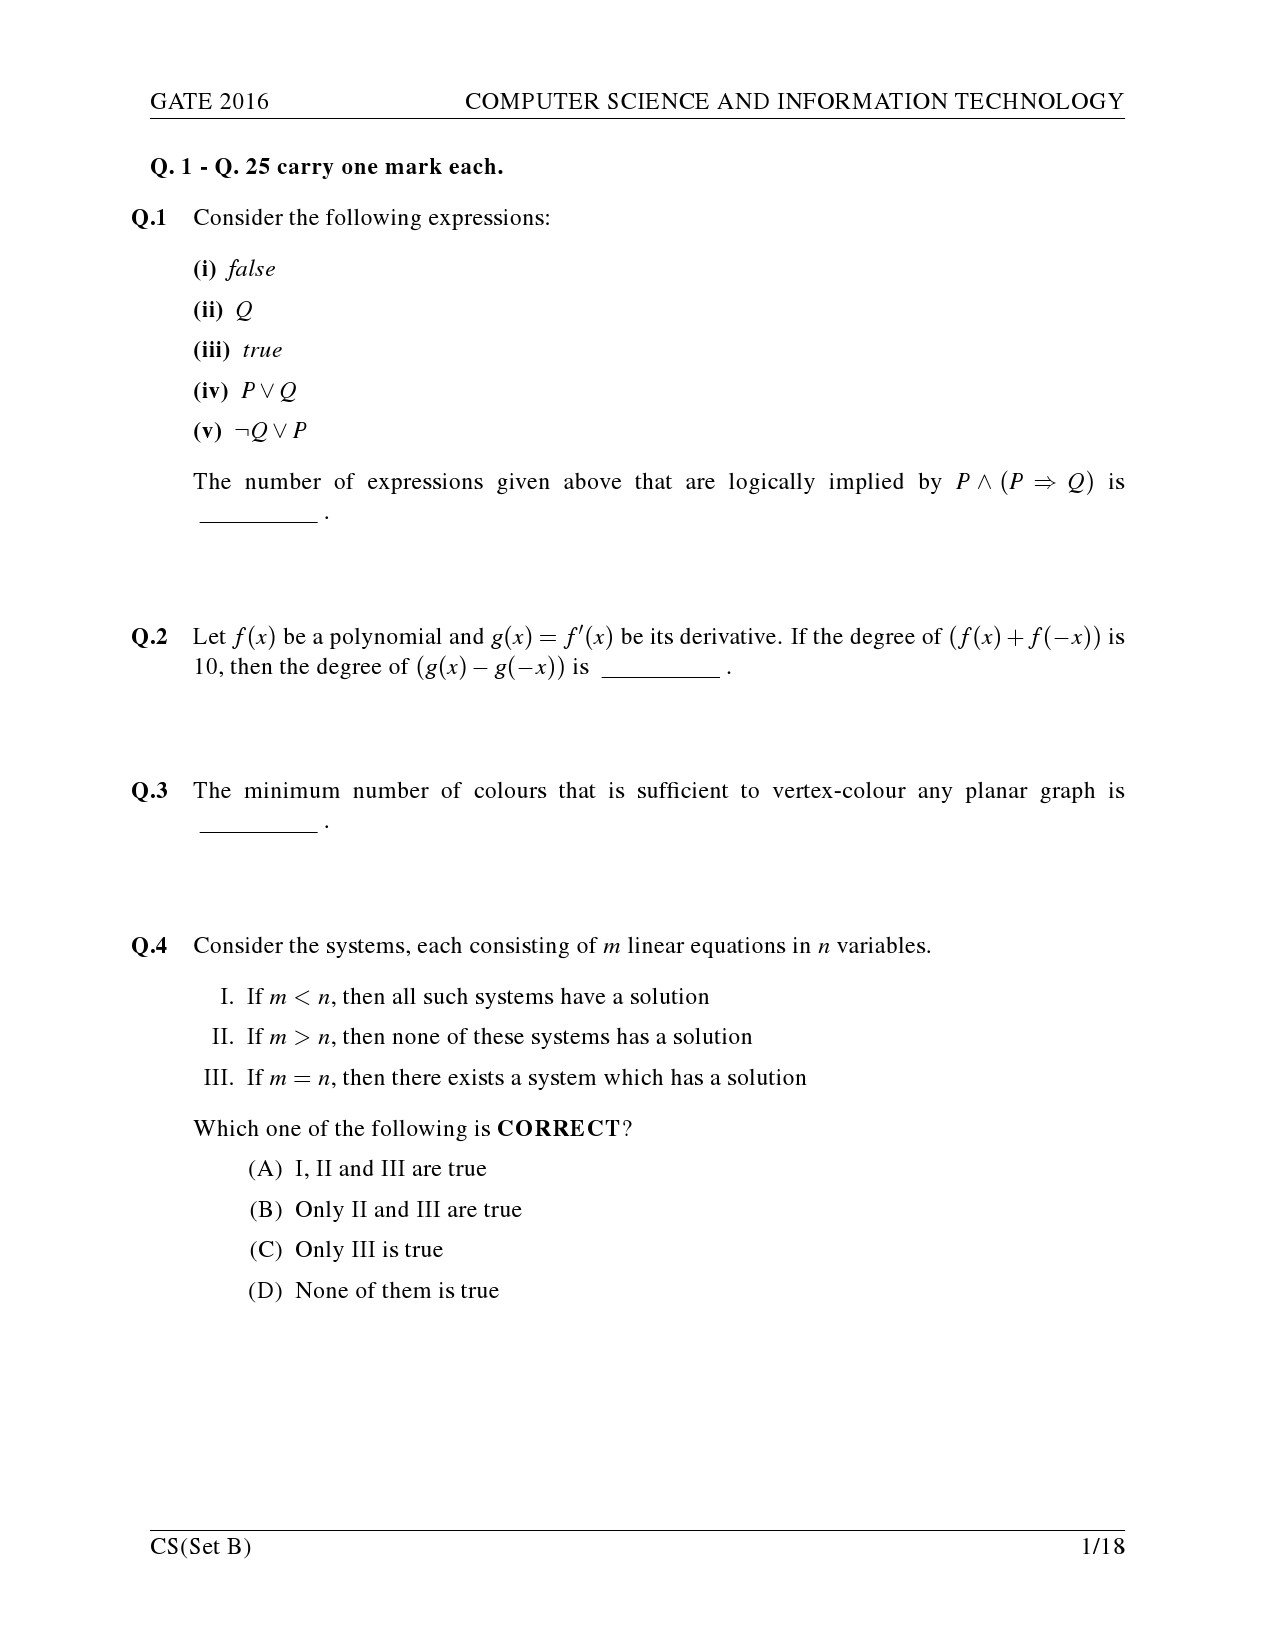 GATE Exam Question Paper 2016 Computer Science and Information Technology Set B 4